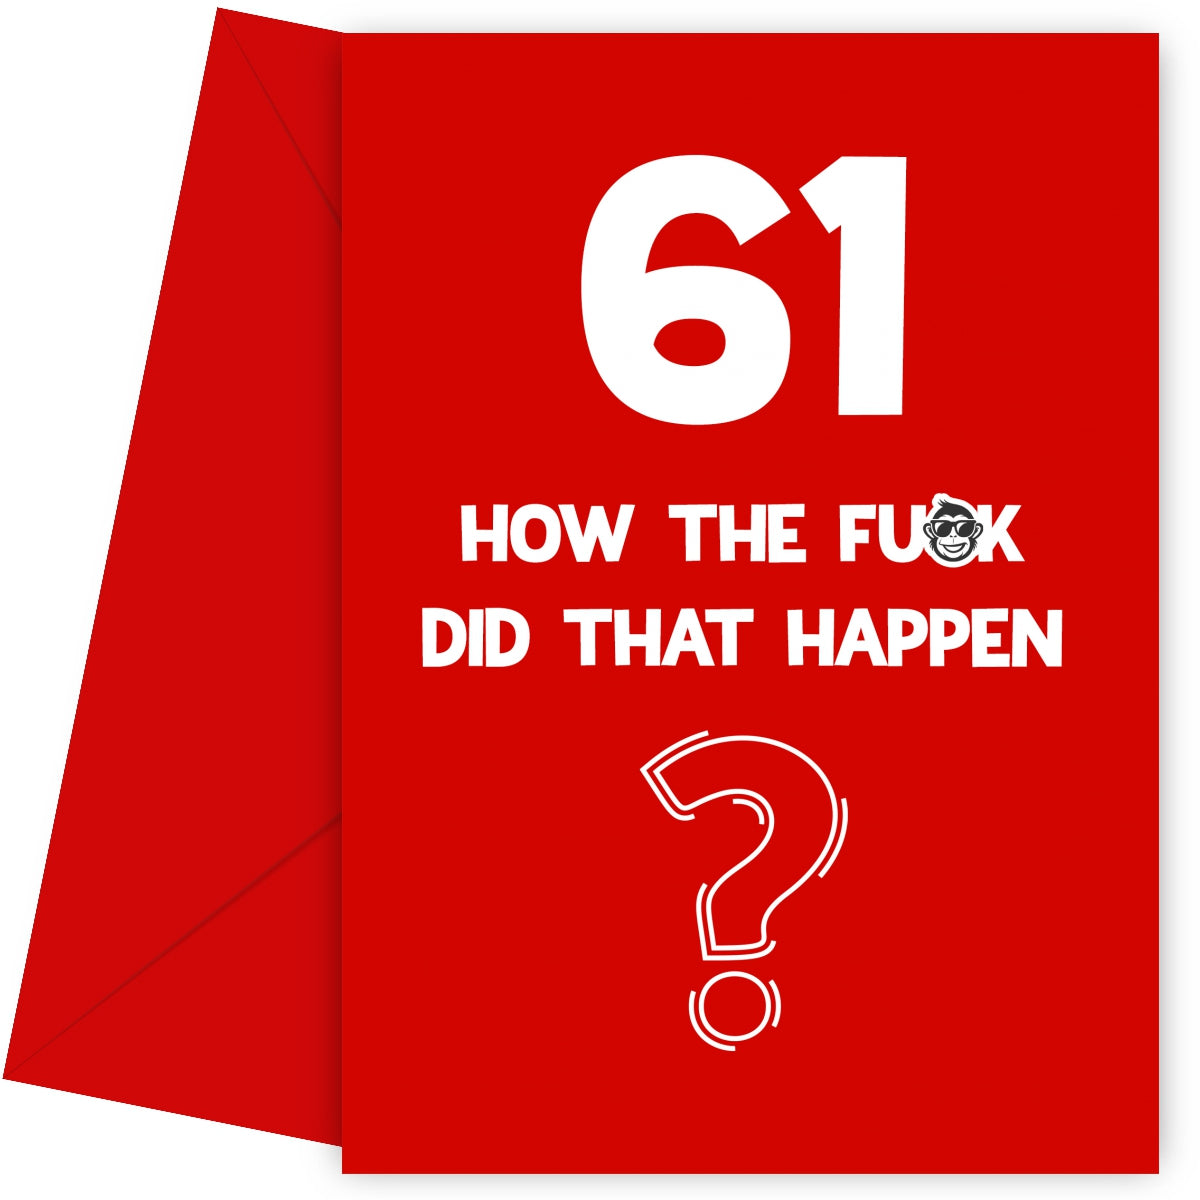 Funny 61st Birthday Card - How Did That Happen?